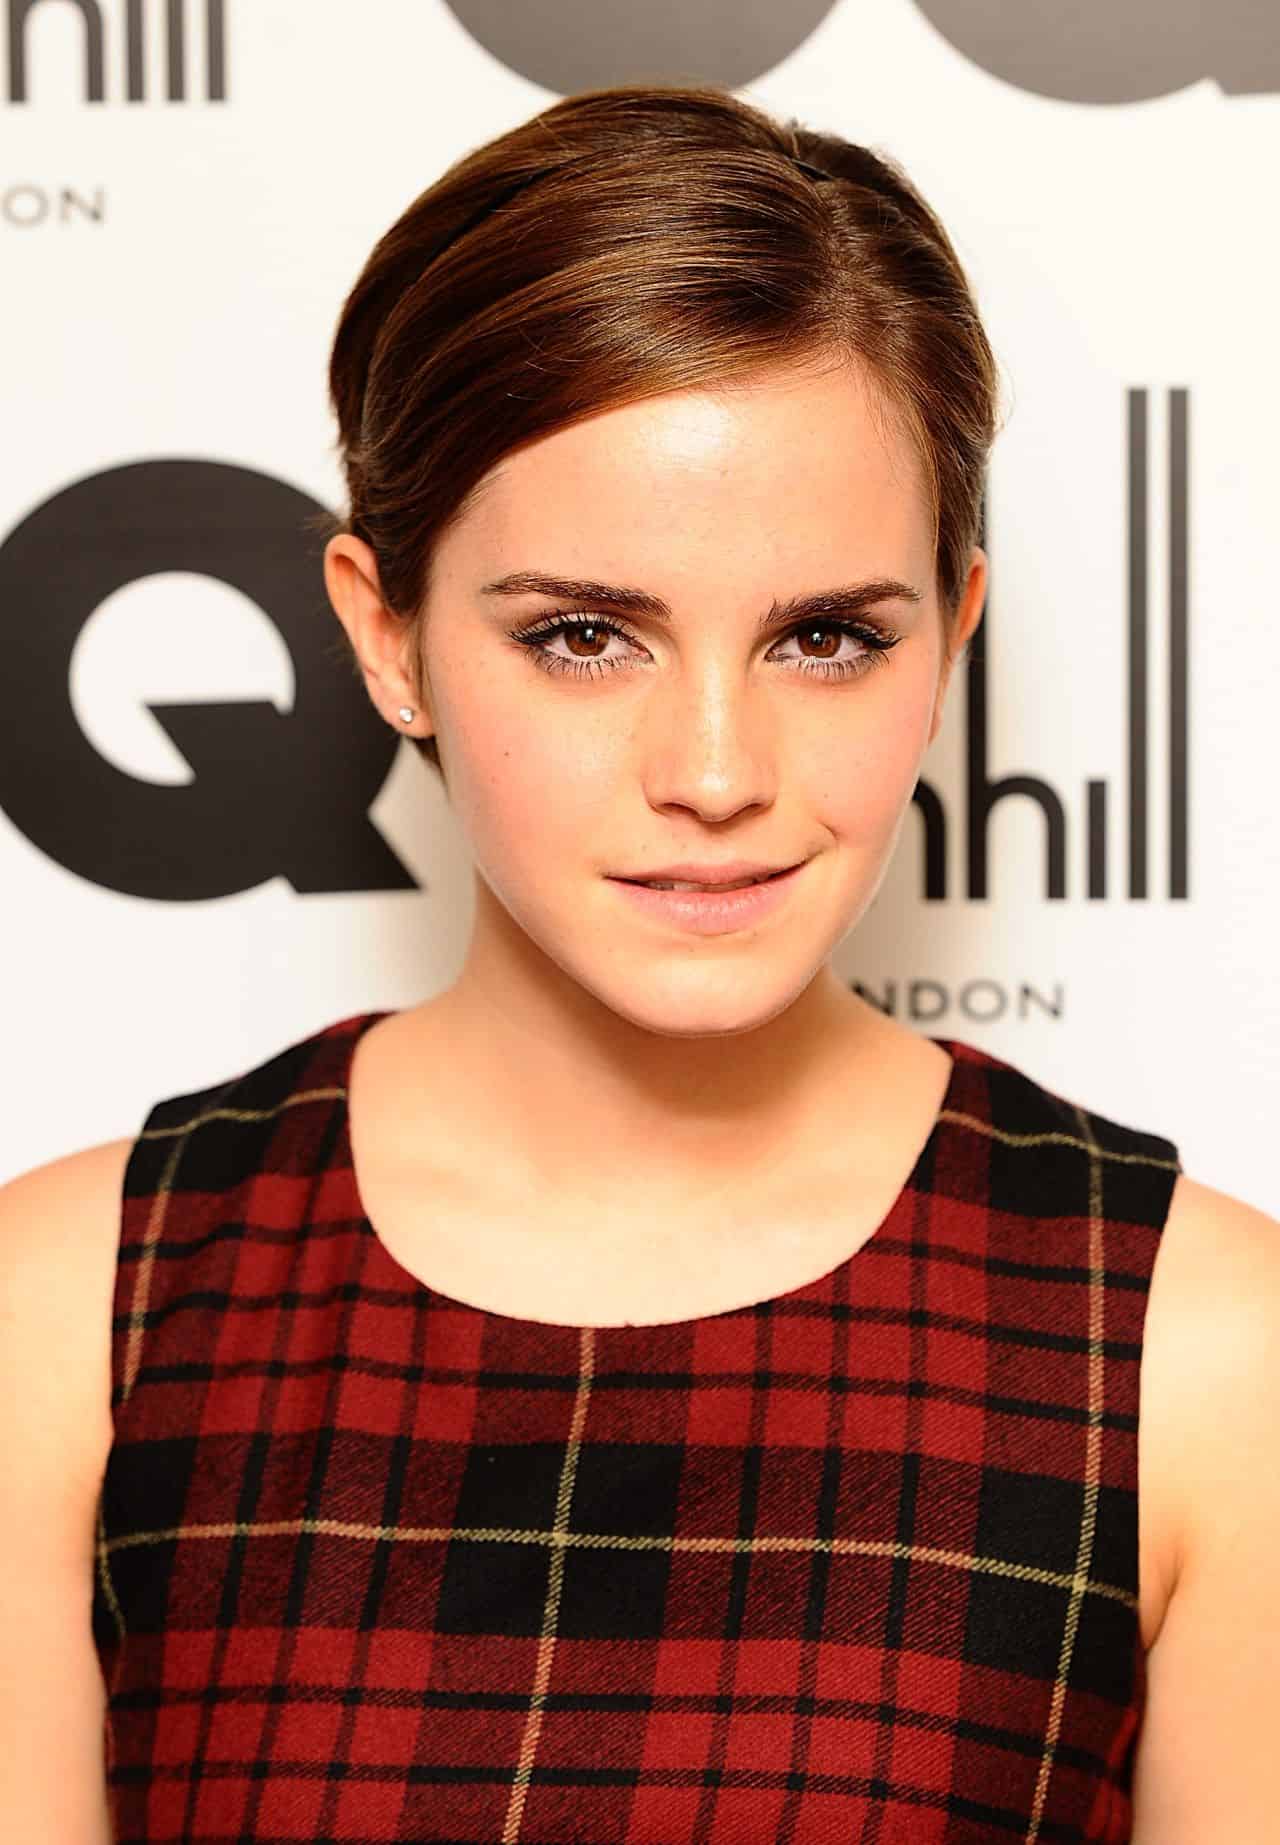 Emma Watson Looks Stunning in Plaid Dress at the GQ Men Of The Year Awards